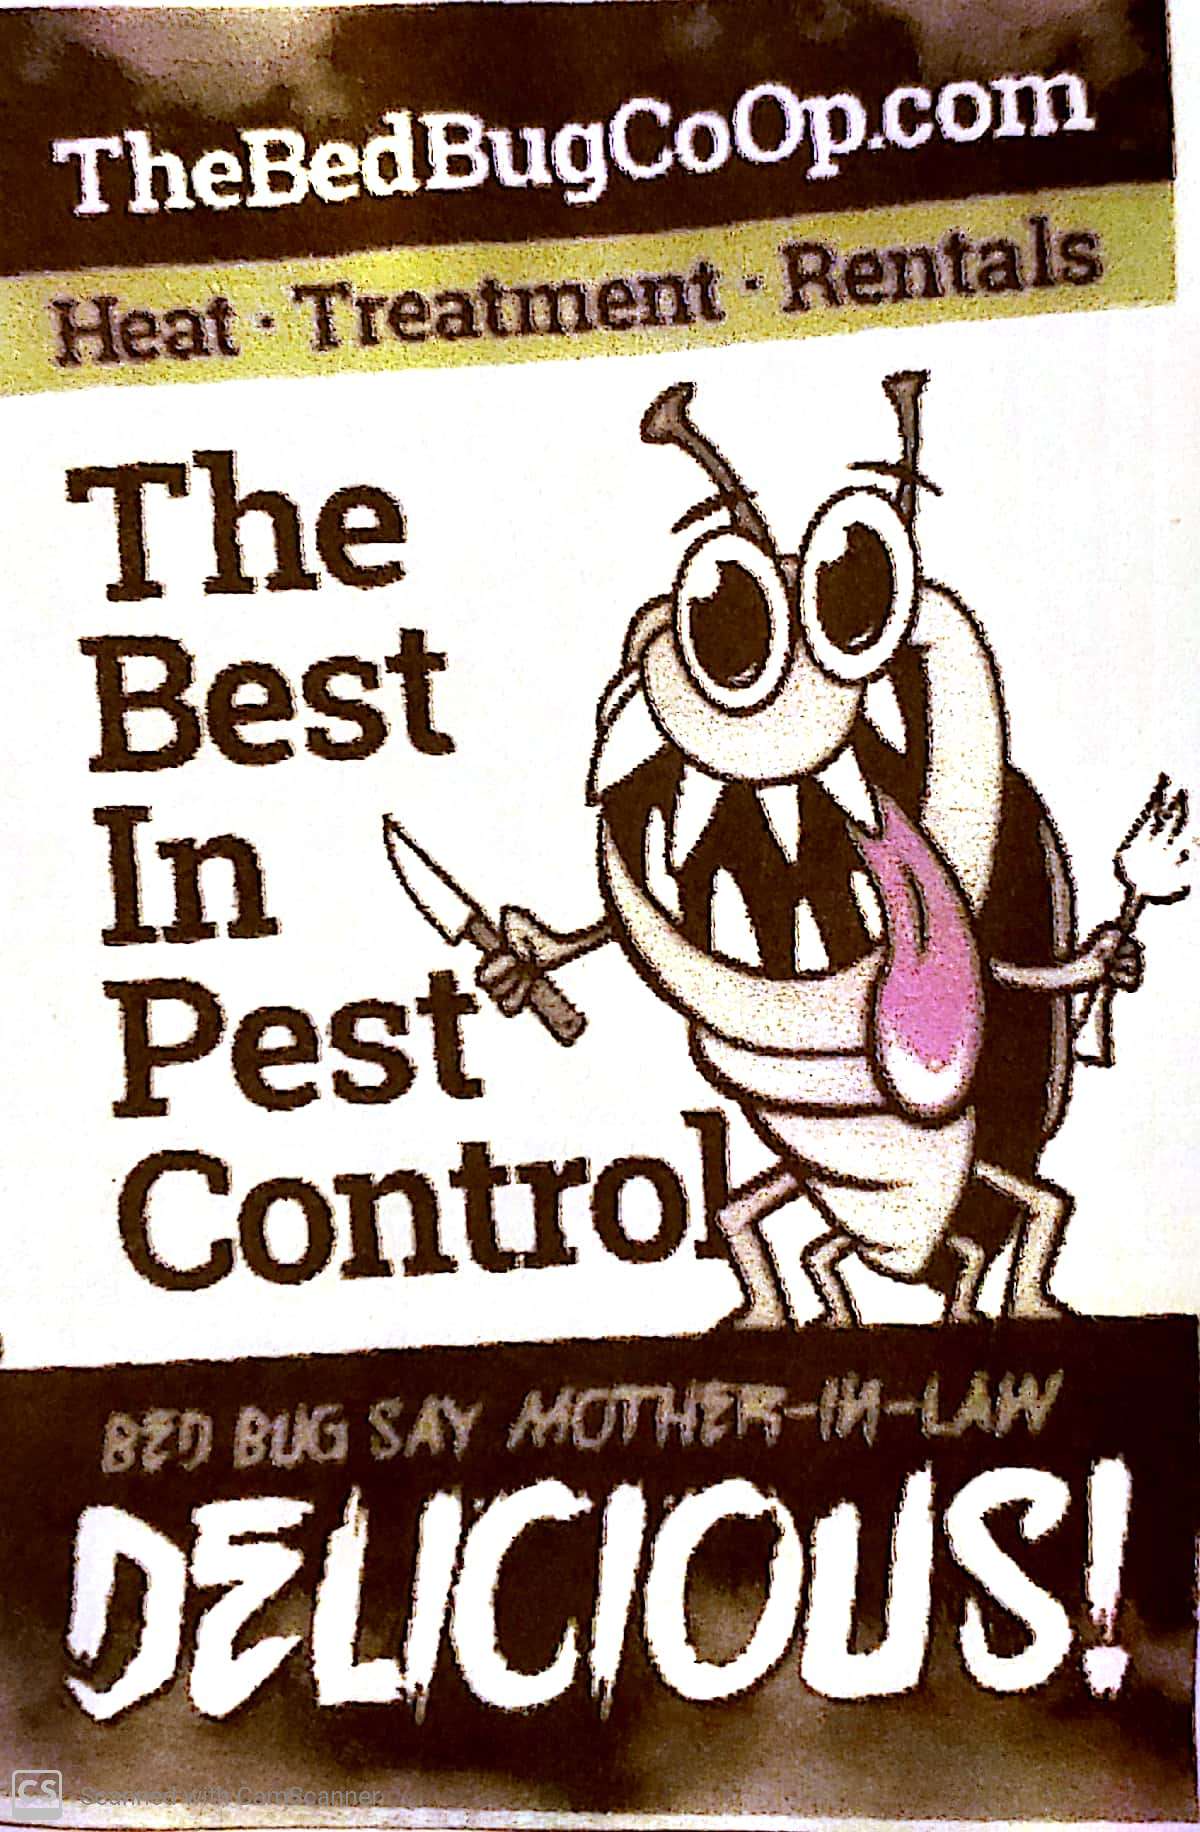 The Bed Bug Co-Op